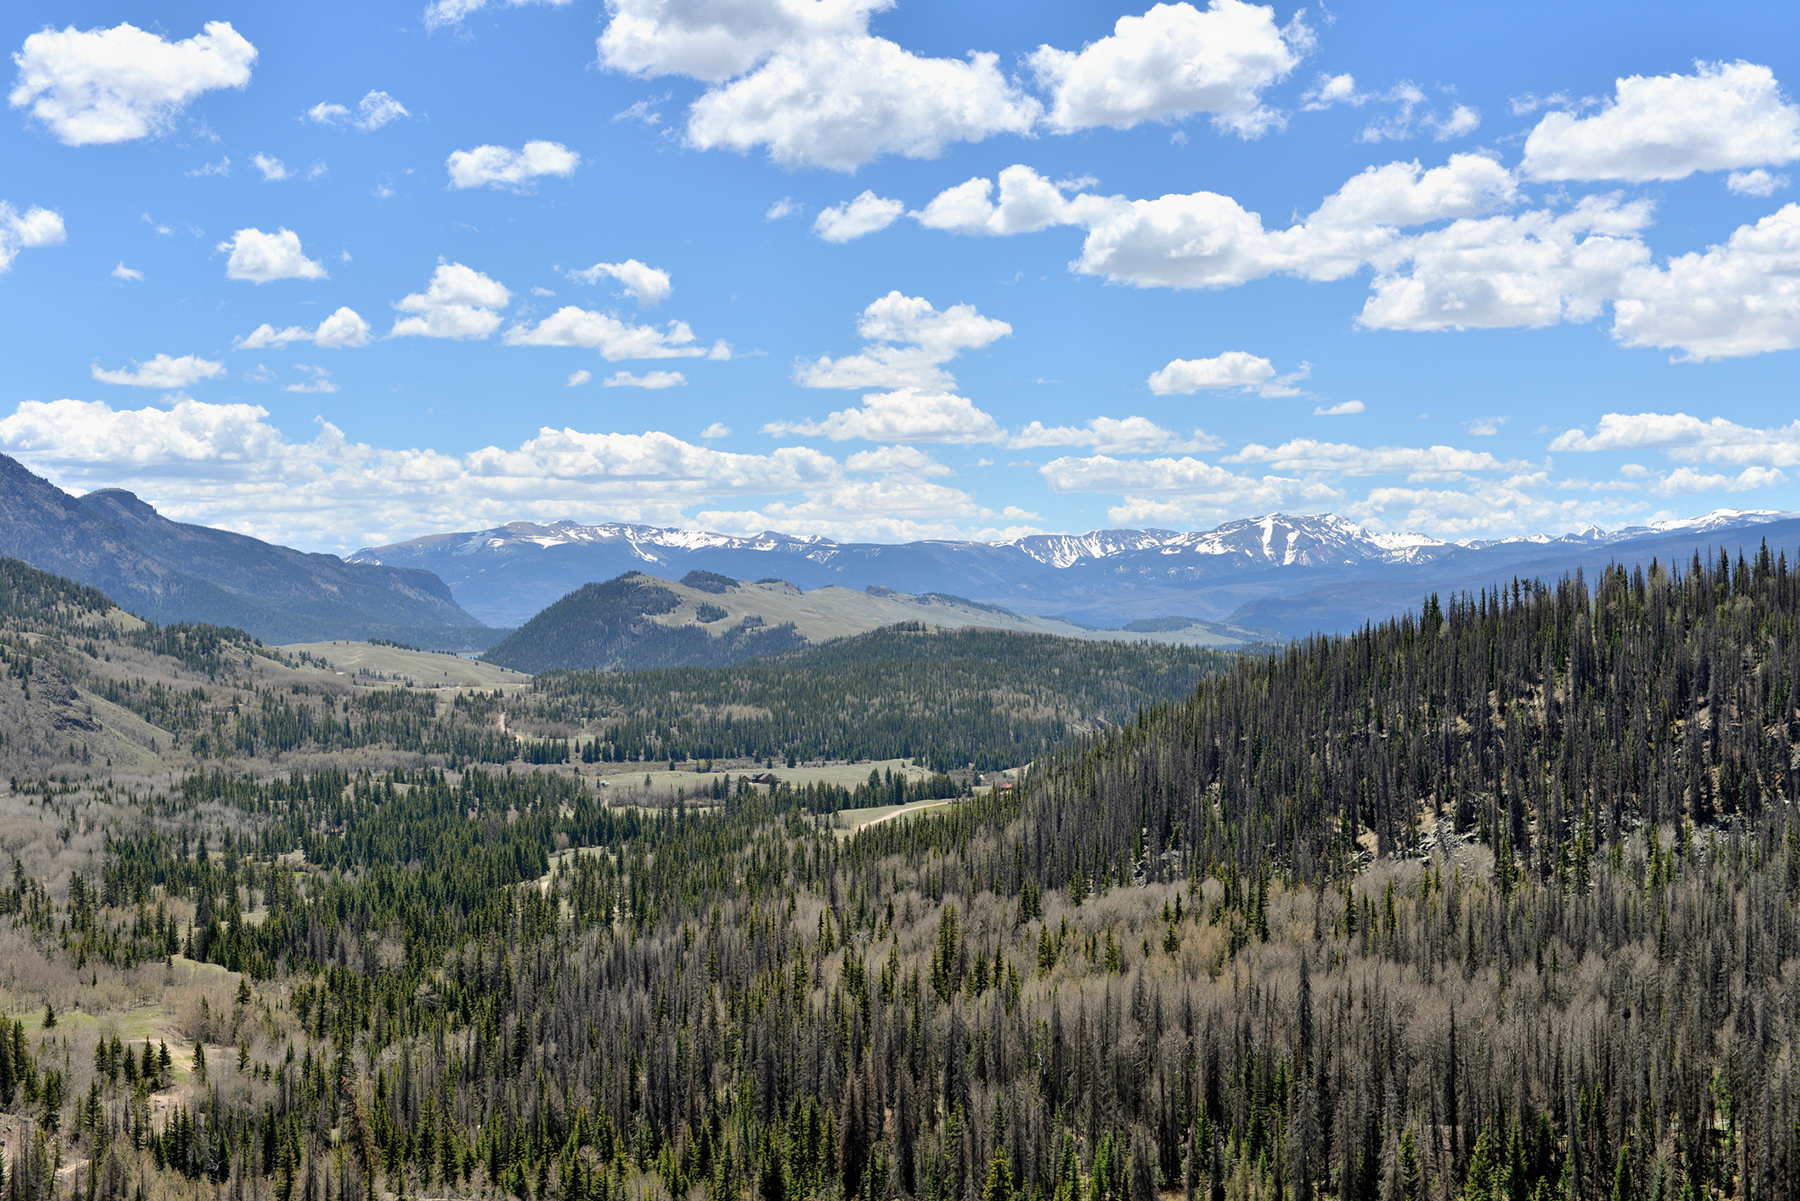 view of a forested valley with snowcapped peaks in the distance.